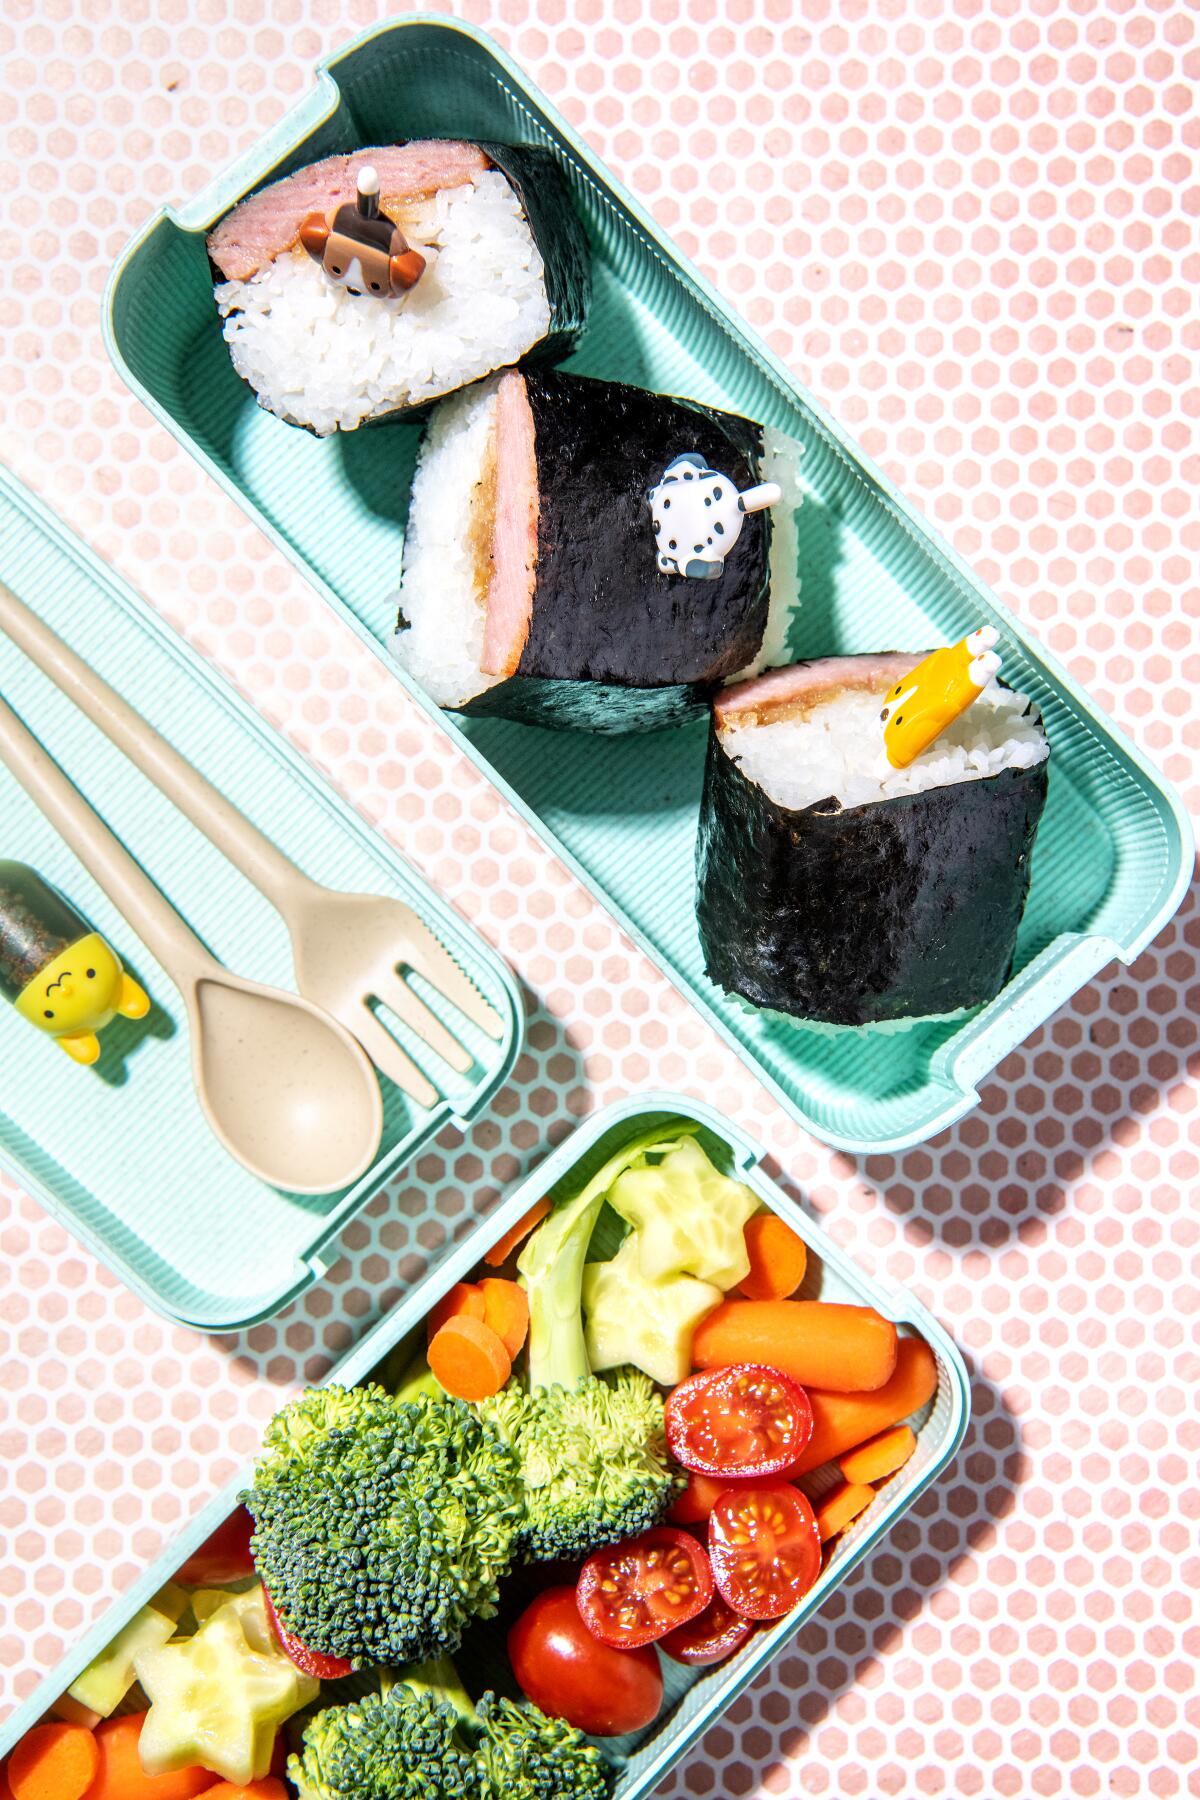 Spam musubi, cucumbers, tomatoes, baby carrots, and broccoli by Jessica Woo